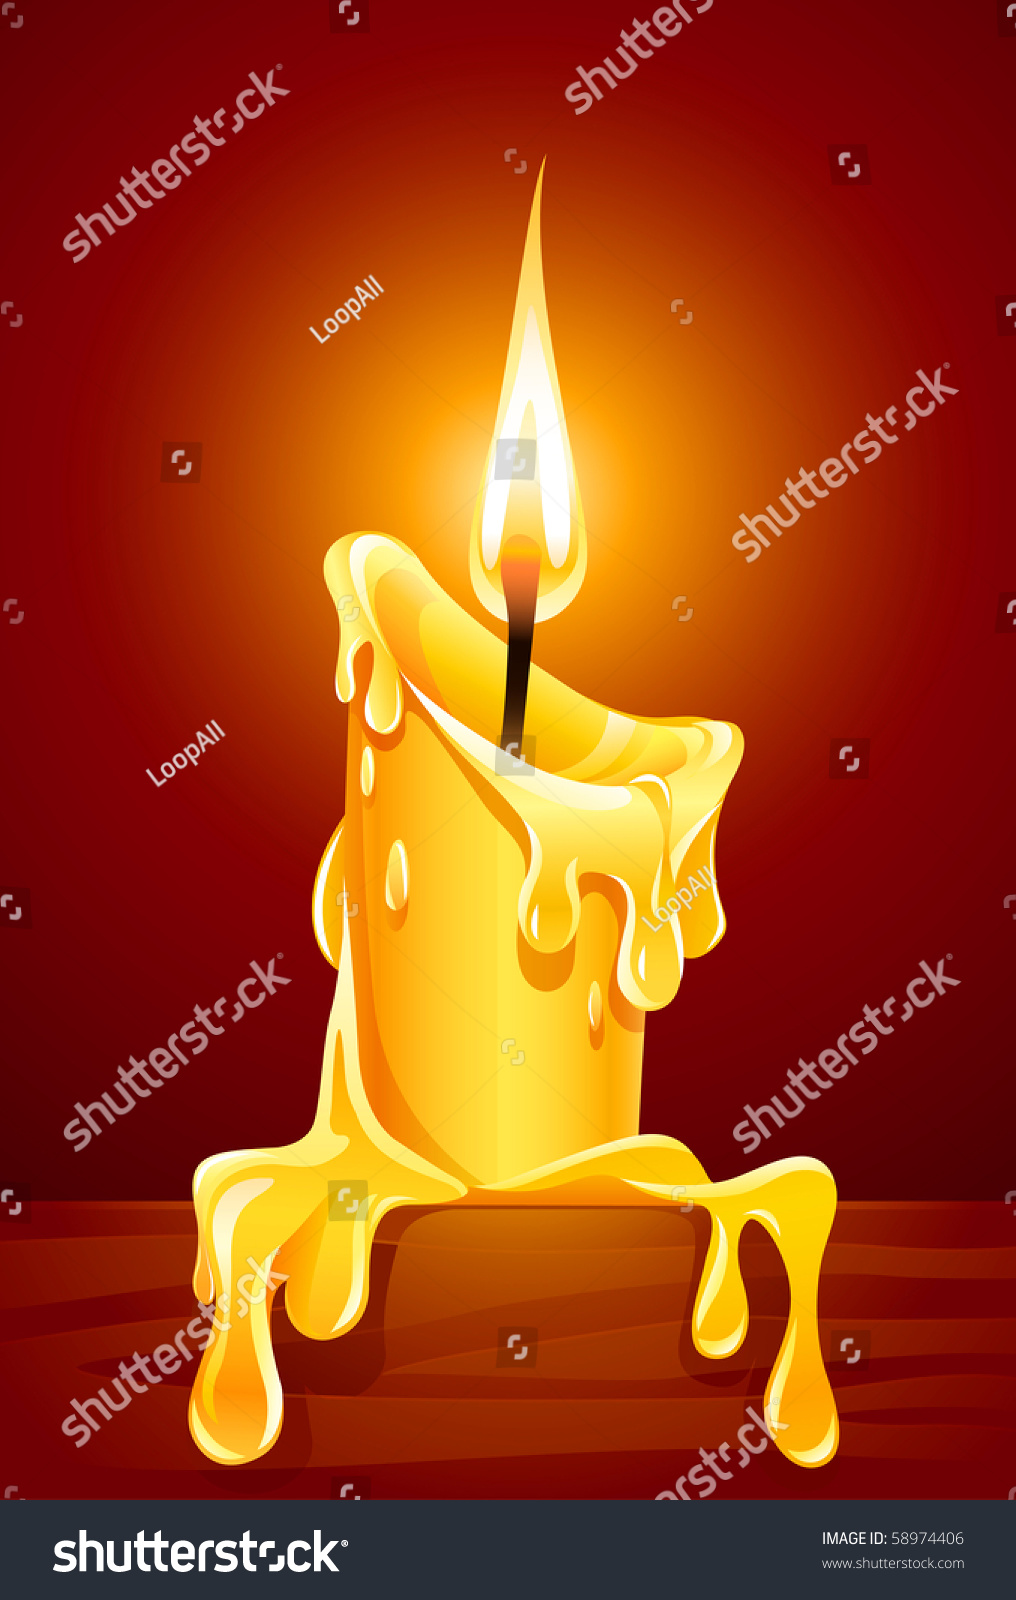 Candle Illustrations Vector Images Candle Illustration Candle Art Drawing Candle Flame Art